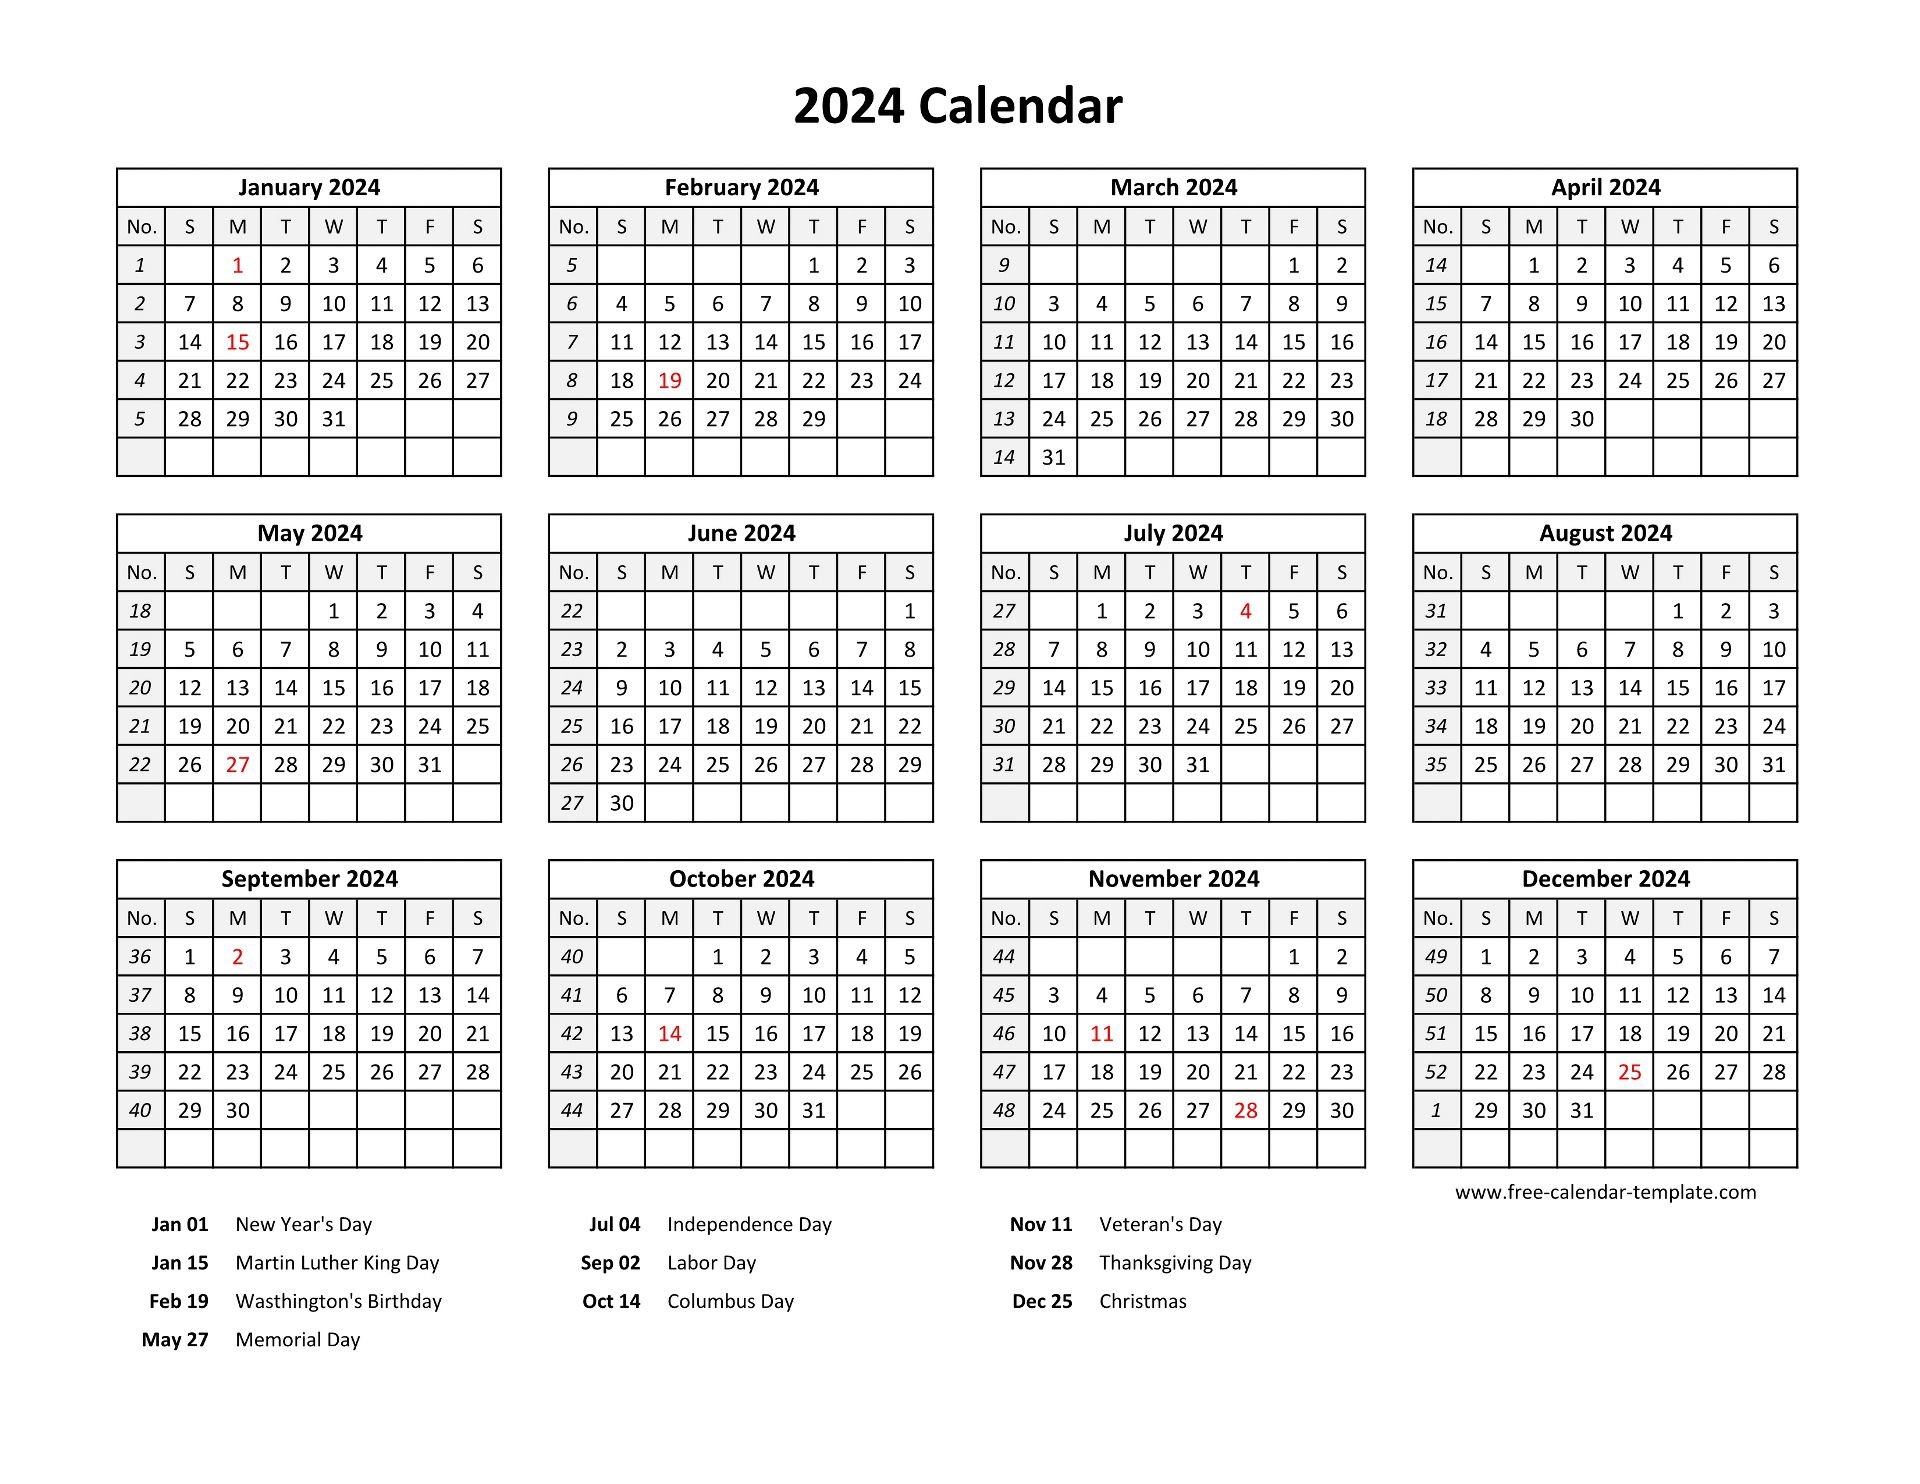 2024 Calendar With Holidays Printable Pdf Free Template Jany Roanne